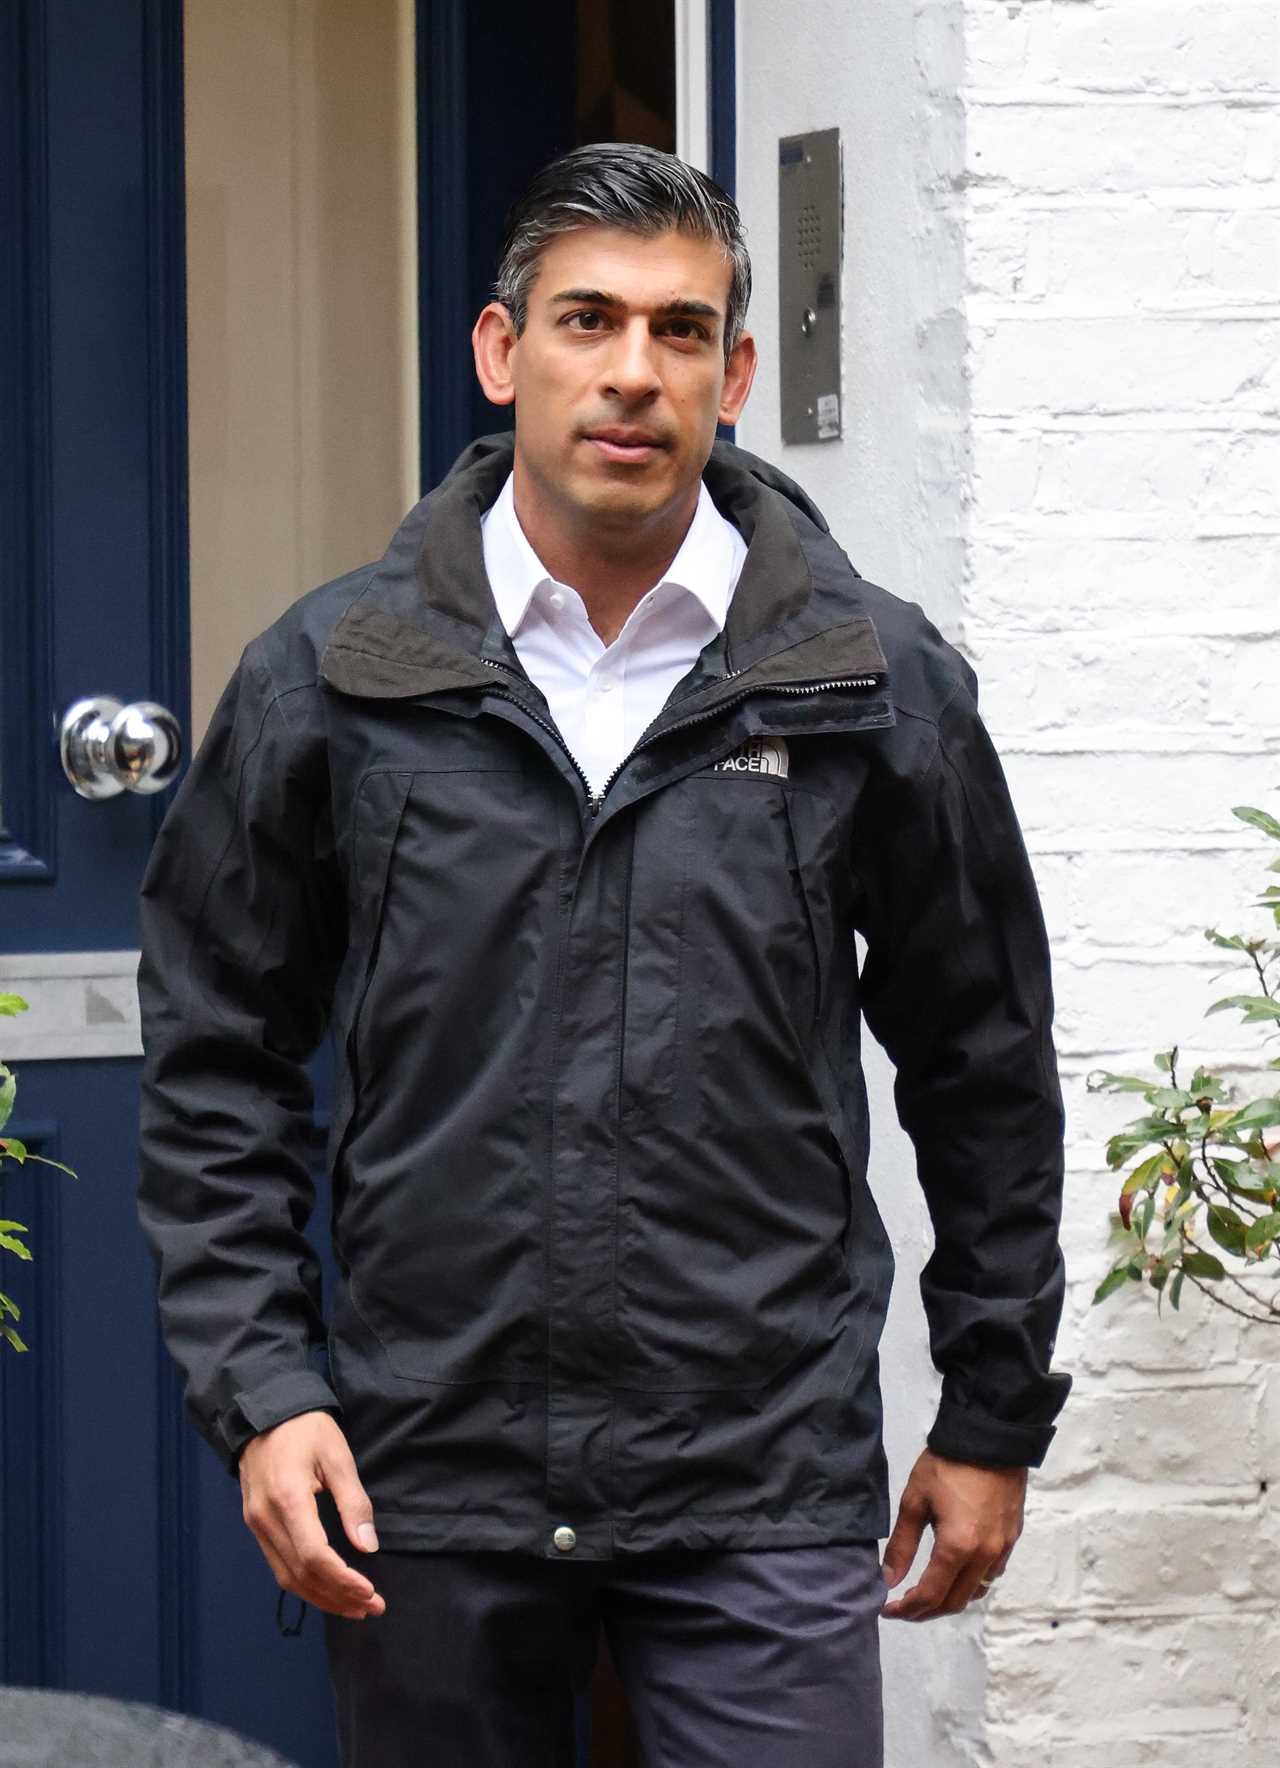 Rishi Sunak leads in No10 race and gains support from 150 MPs backing his serious PM pitch